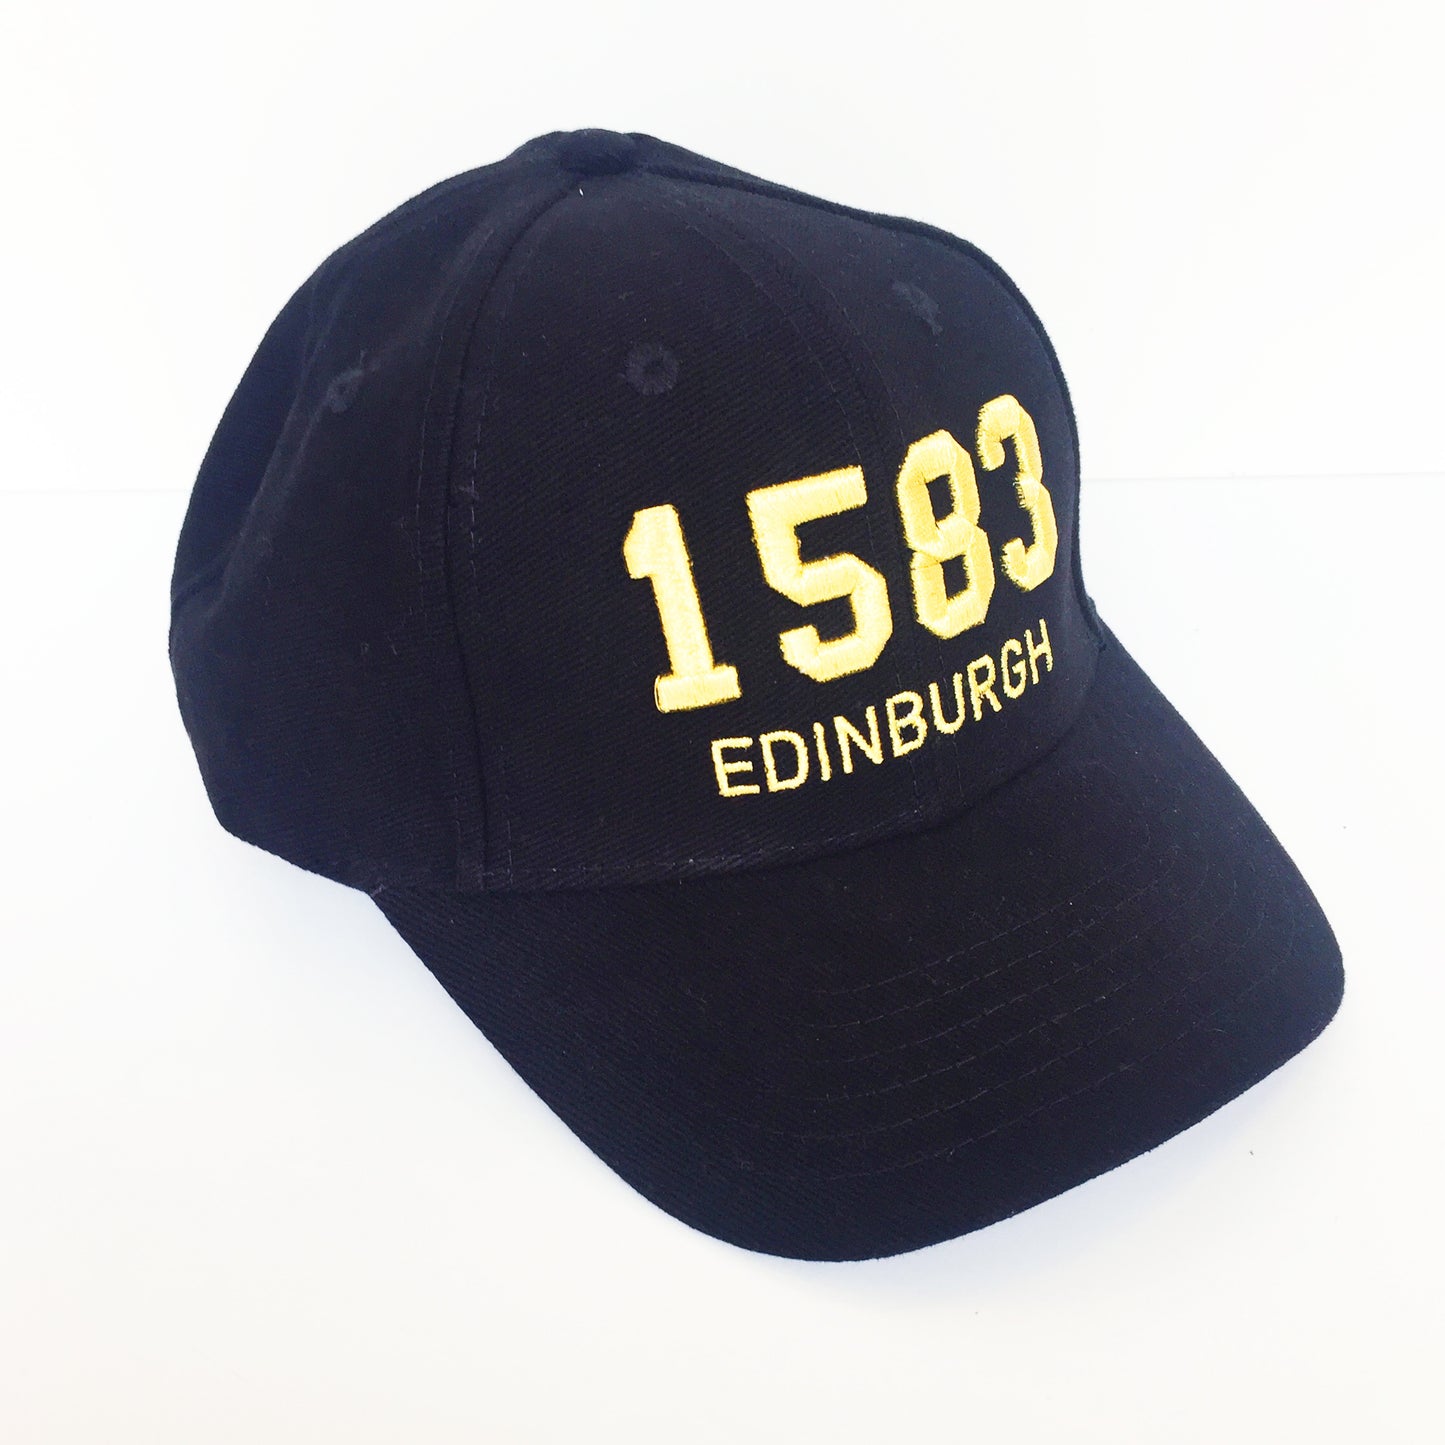 Black cap with '1583 Edinburgh' on the front panel in gold embroidery. 